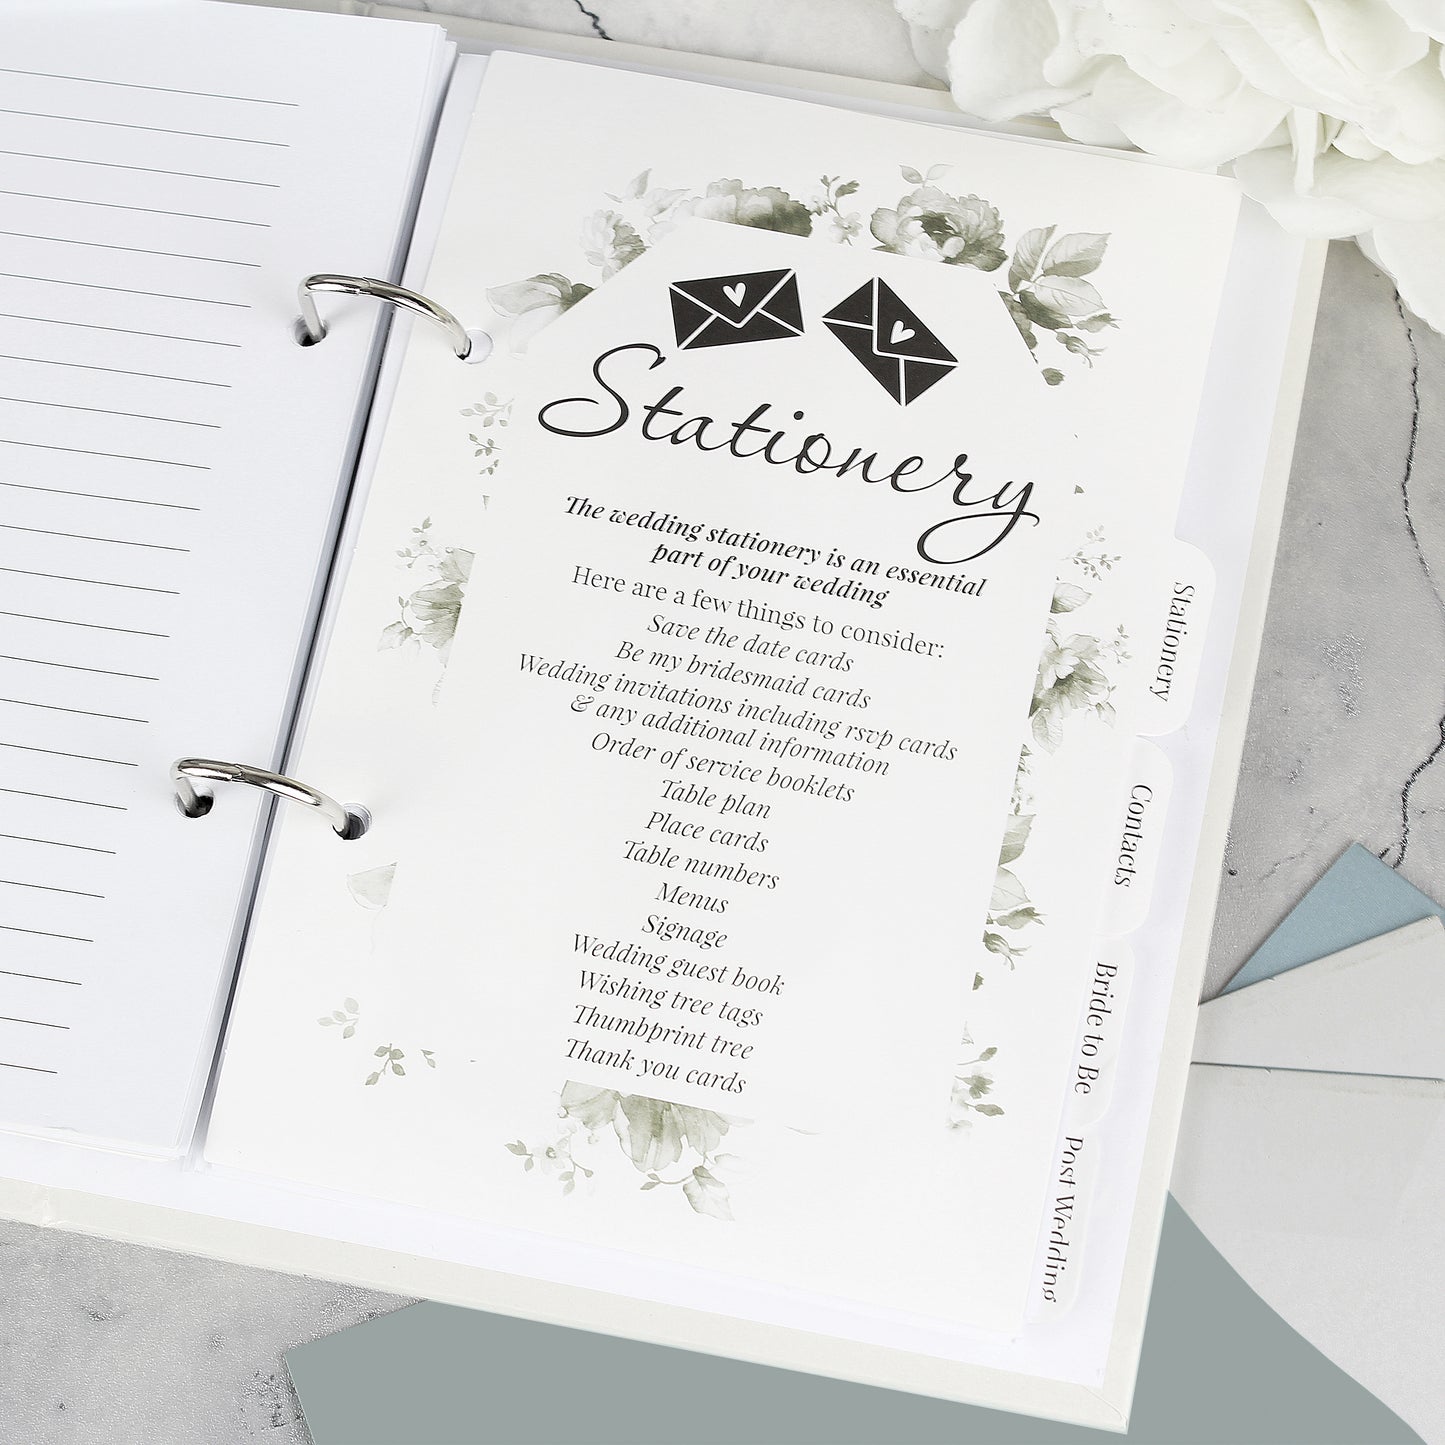 Personalised Happily Ever After Wedding Planner - Personalise It!